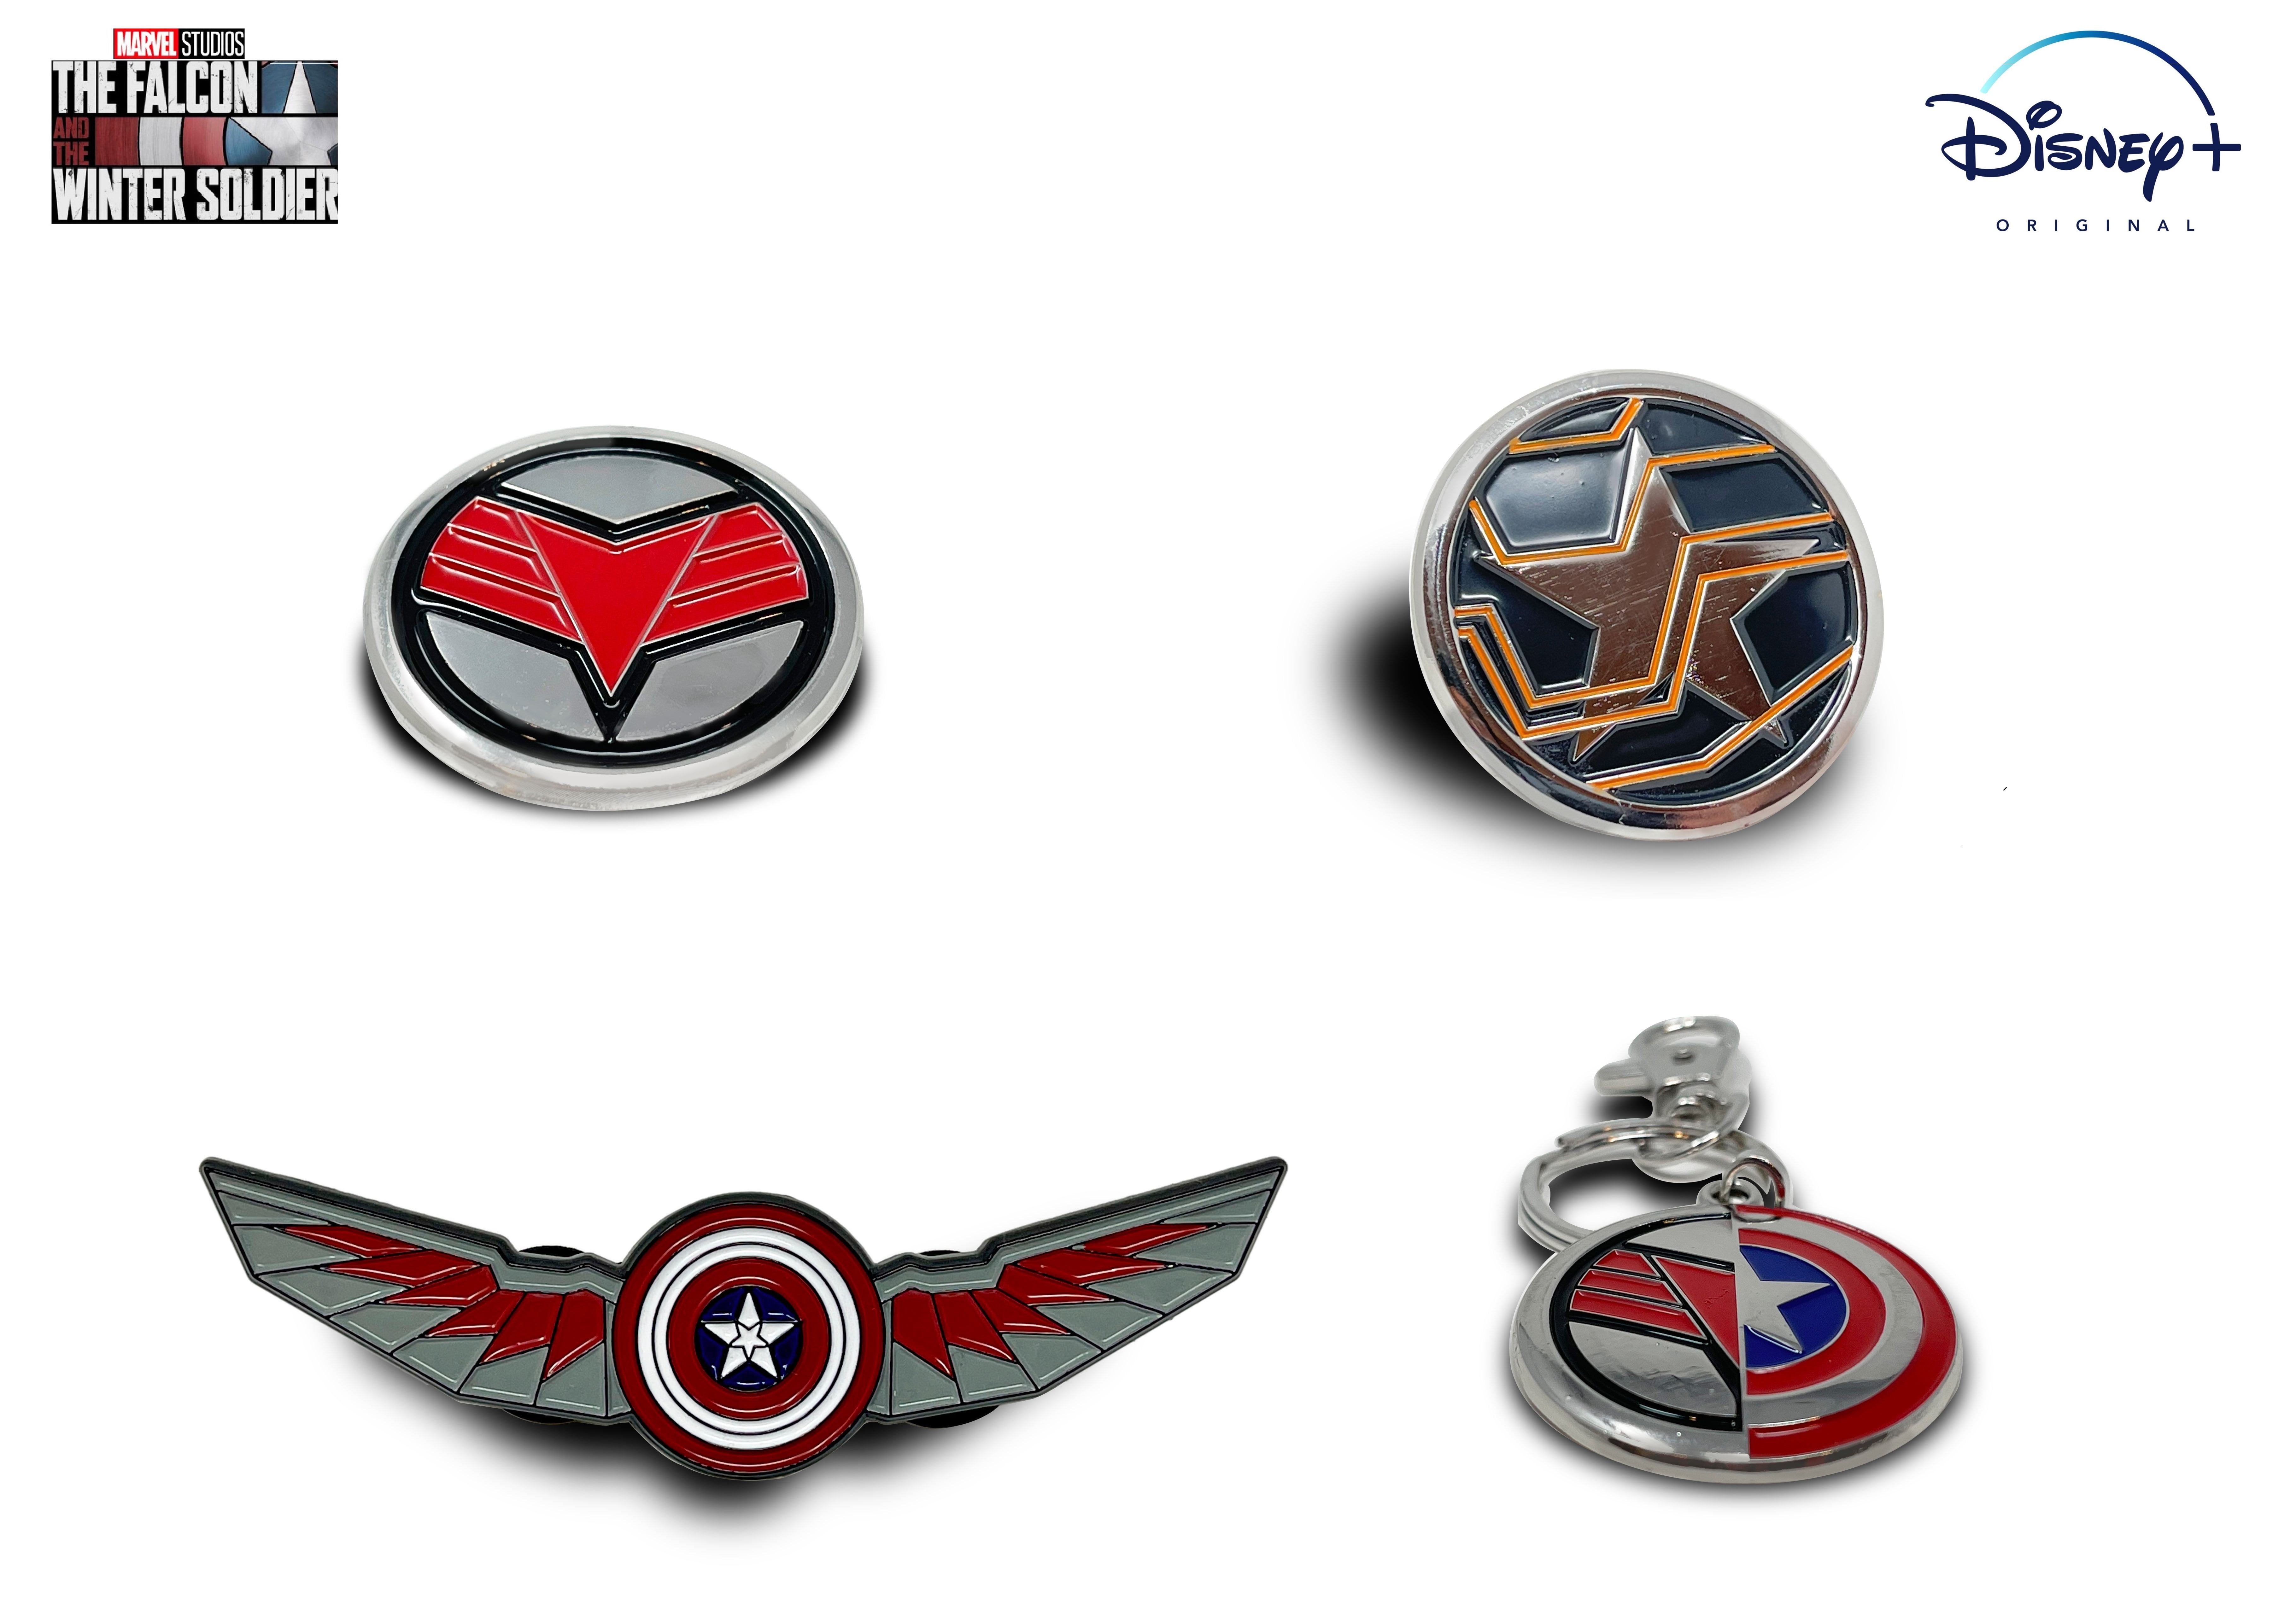 THE FALCON AND THE WINTER SOLDIER COMBO PACK PIN - The Official Marvel  Studios Disney Plus, Enamel Lapel Pin, 3-Pins - Walmart.com